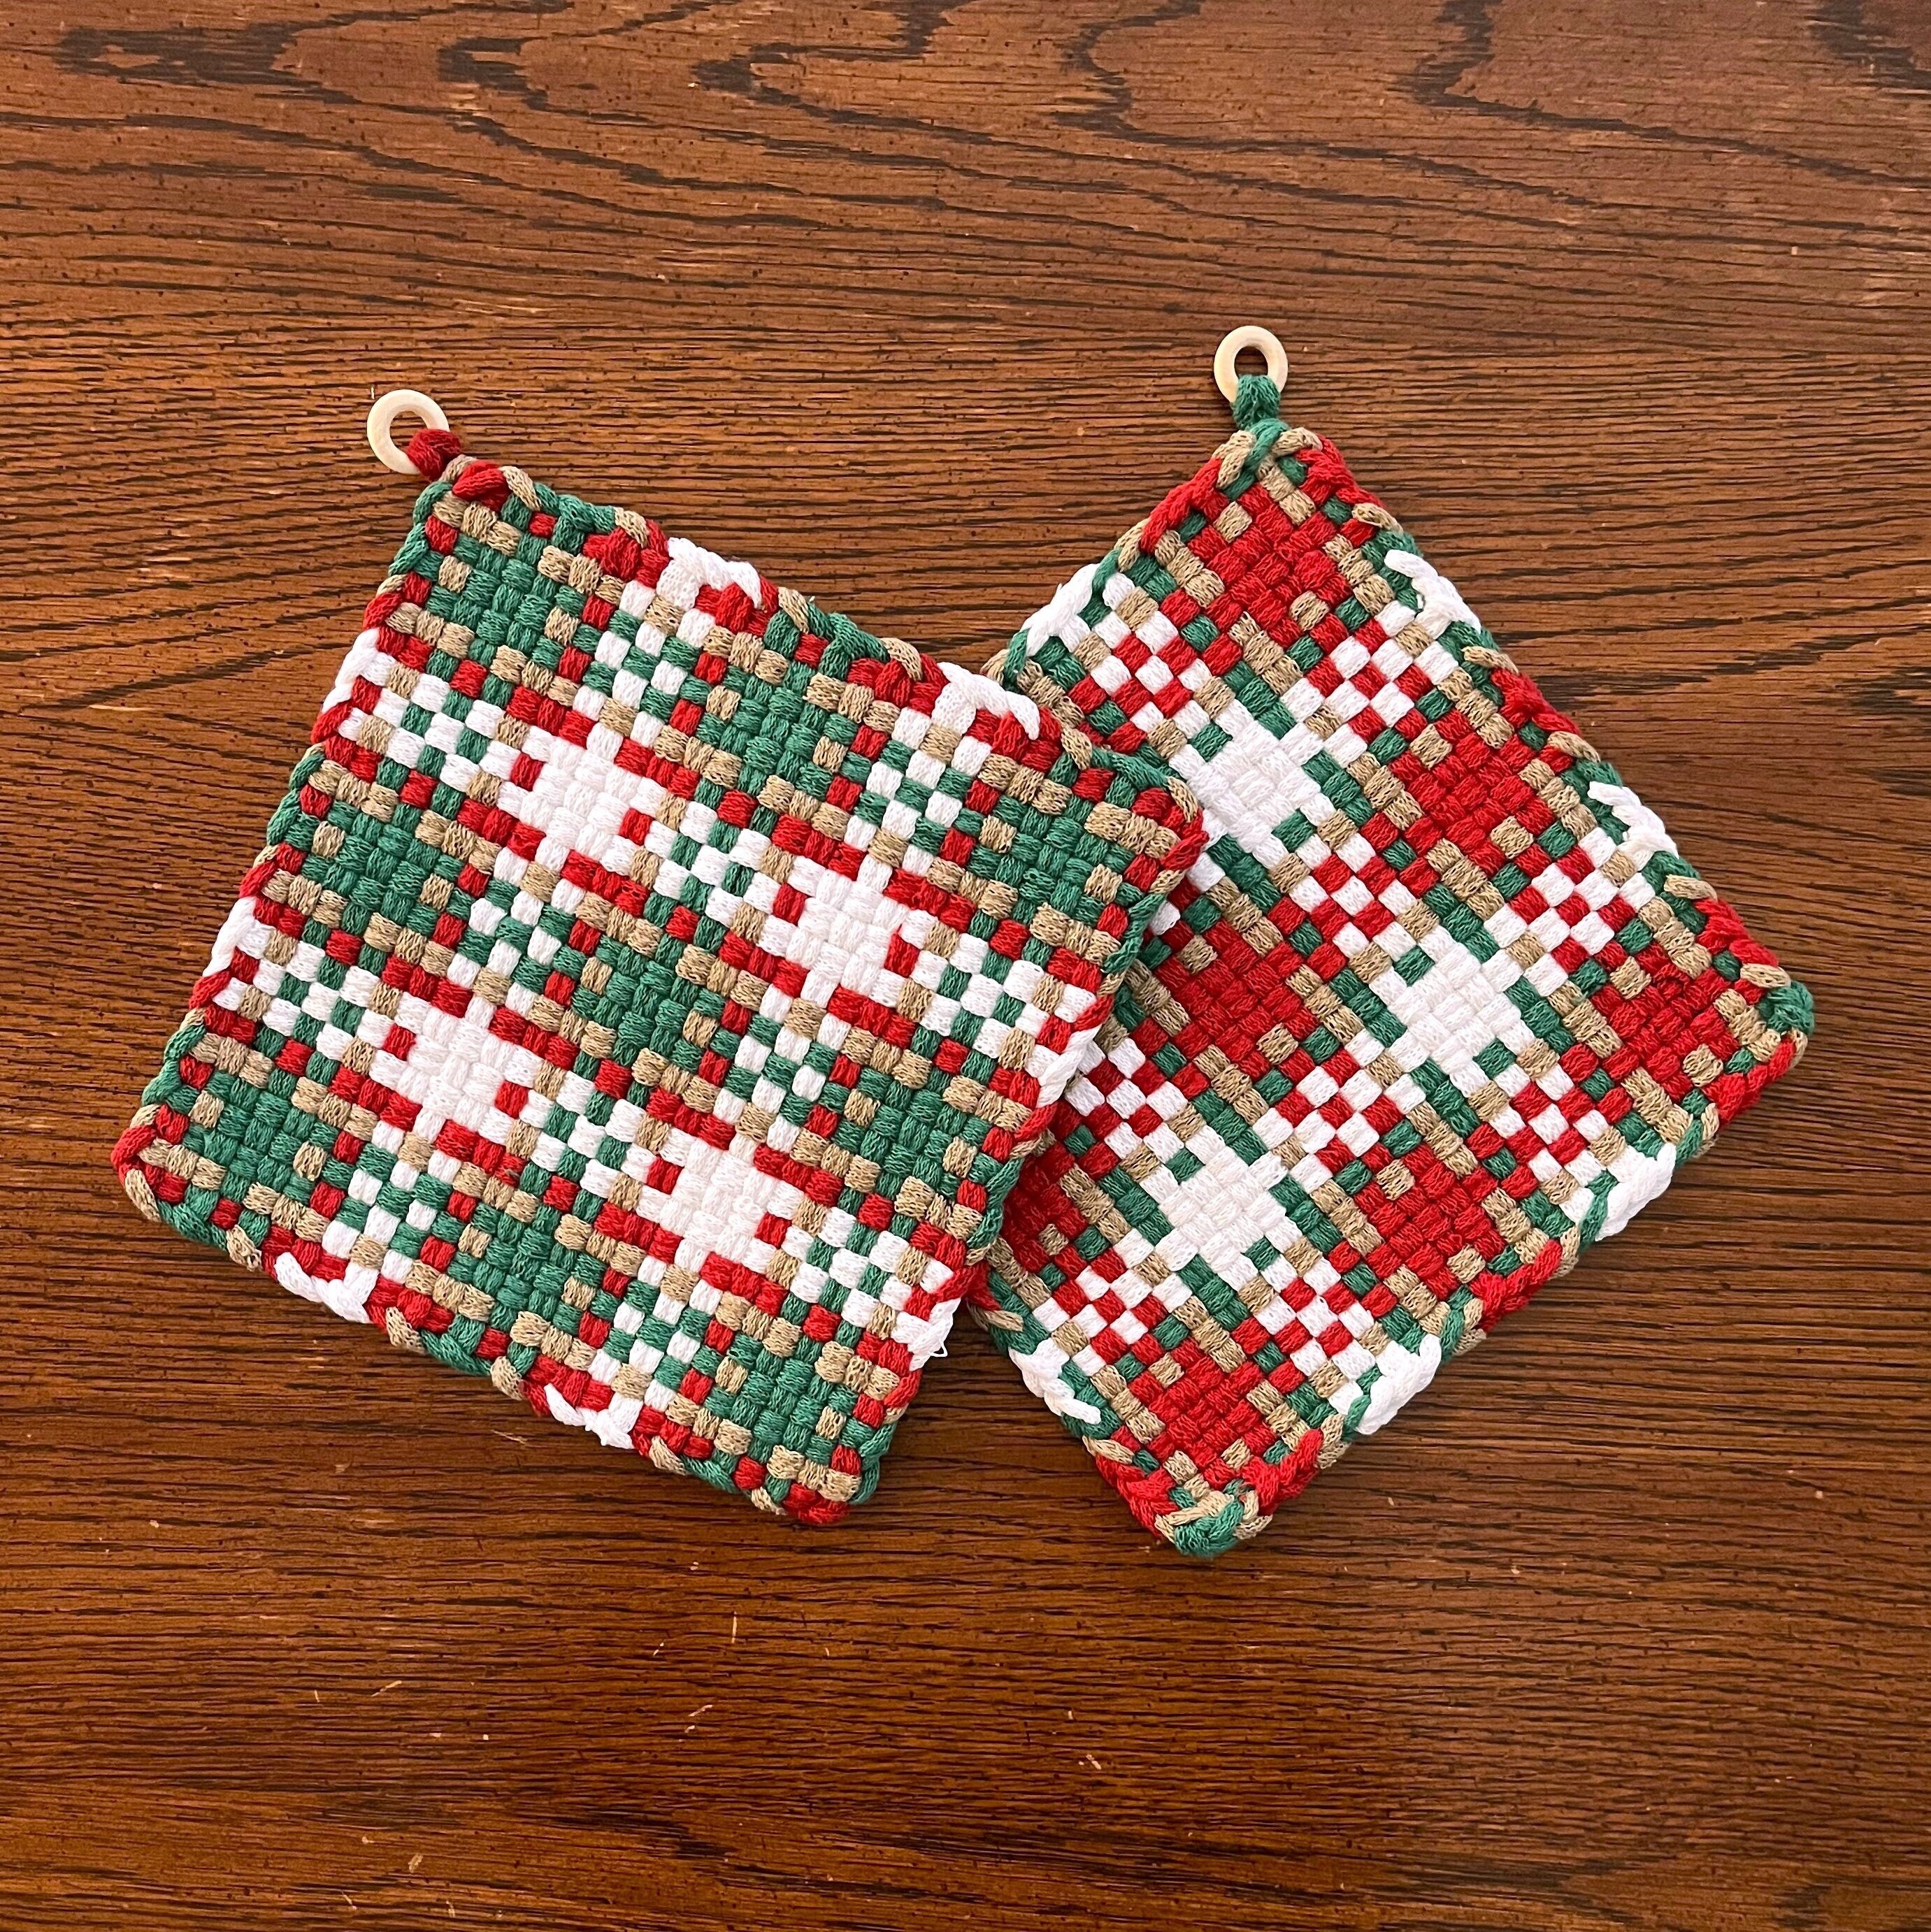 Keeping My Potholder Loops Organized » The Martha Review